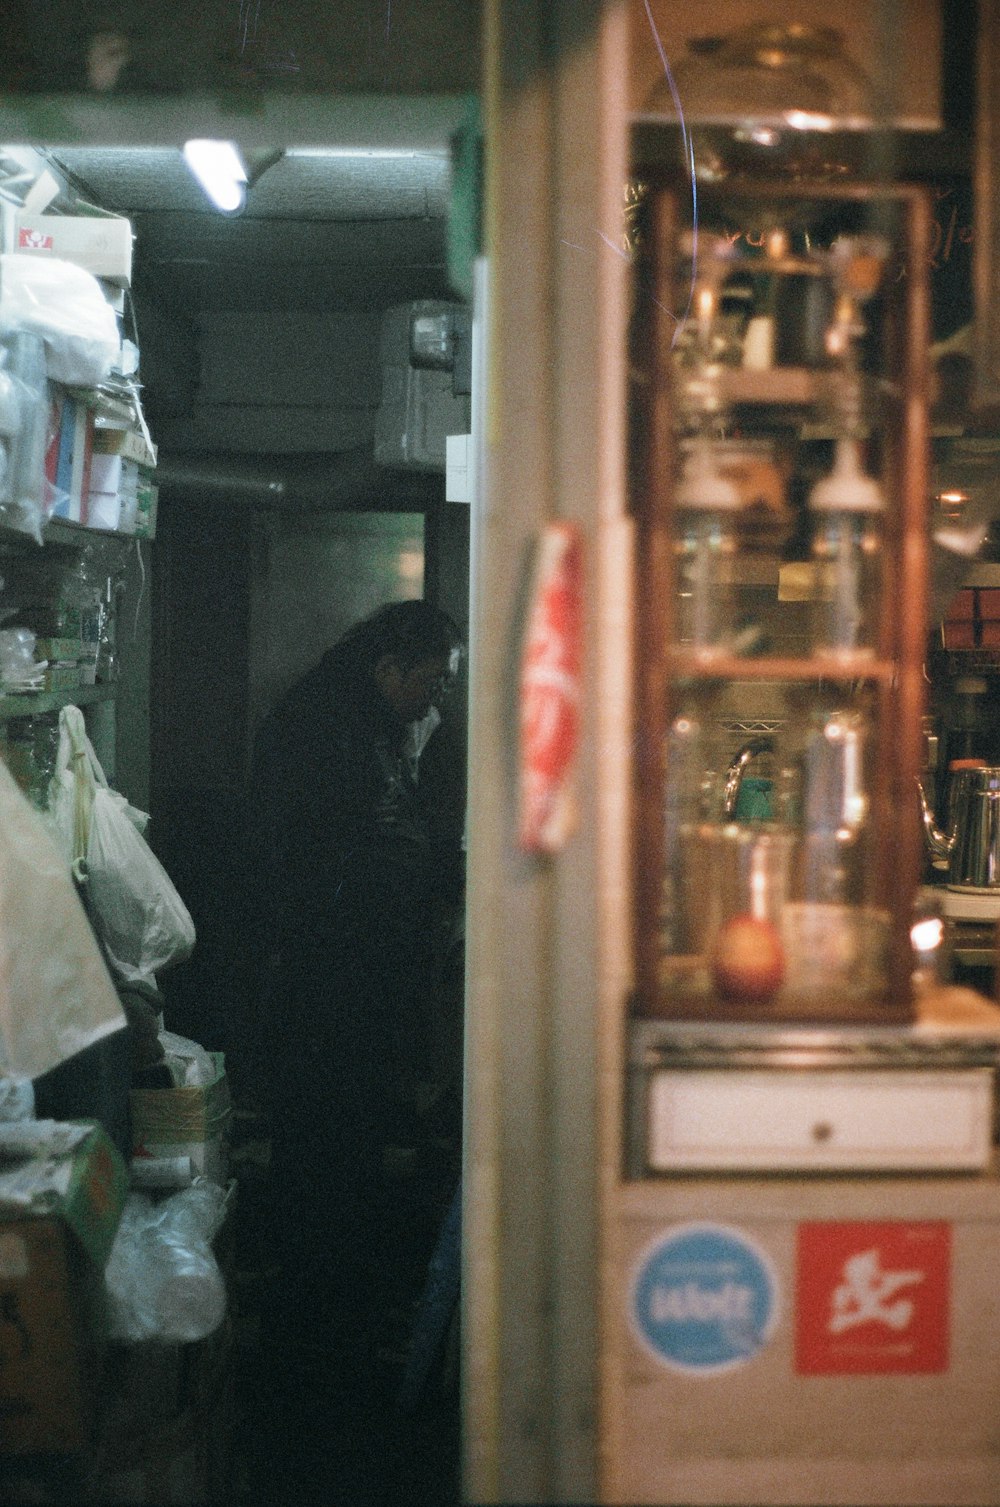 a man standing in a kitchen next to a refrigerator